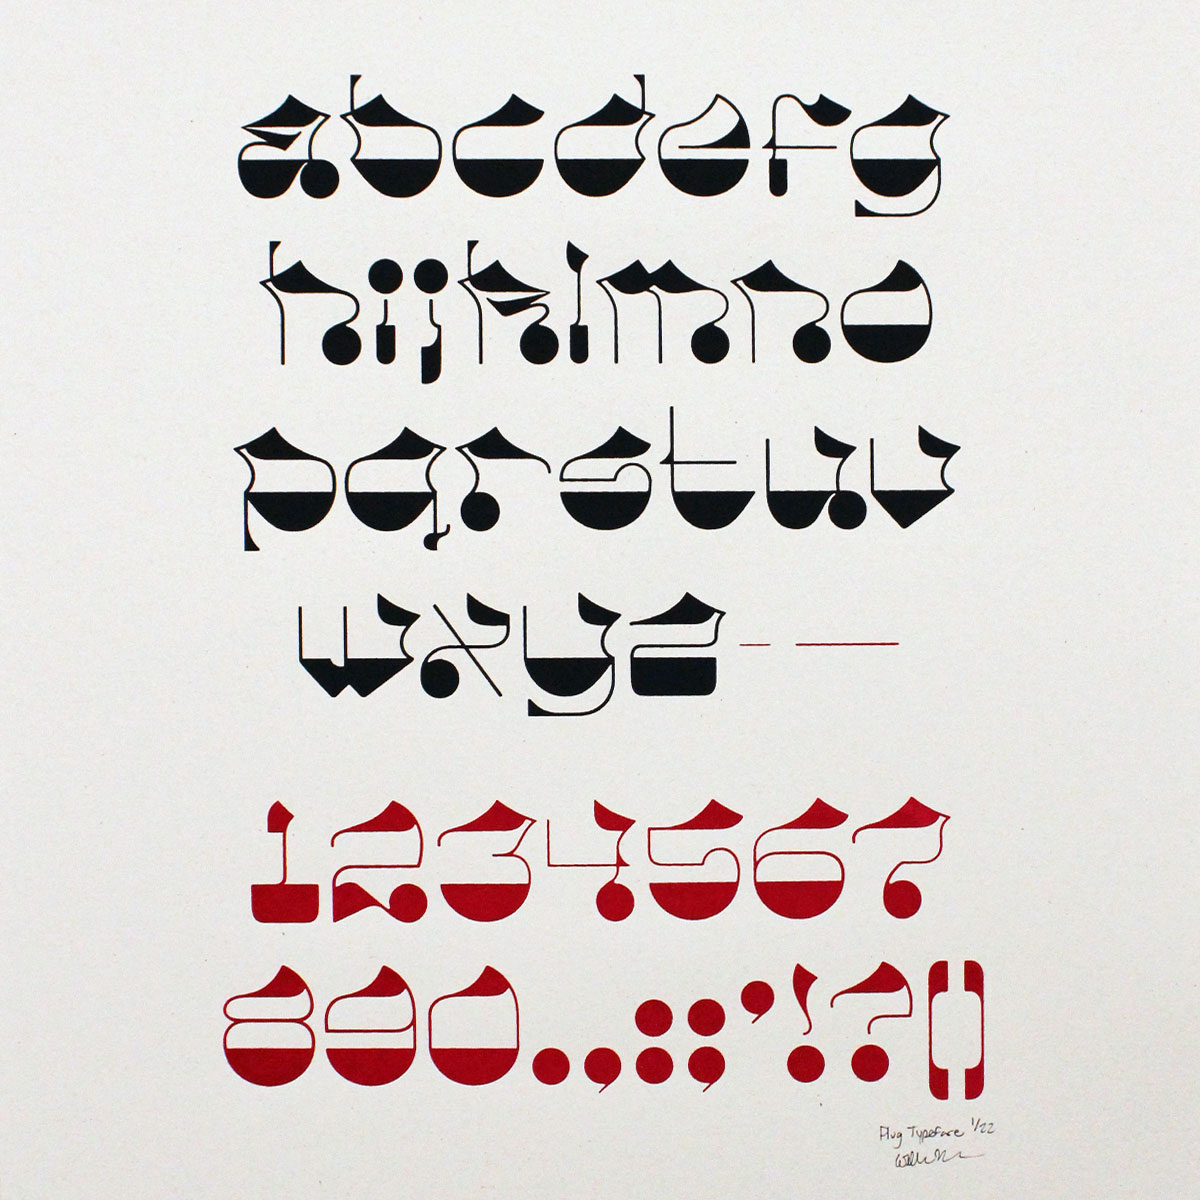 Screen printed poster of the entire typeface, ‘a’ through ‘z’, 0 through 9, and some special characters